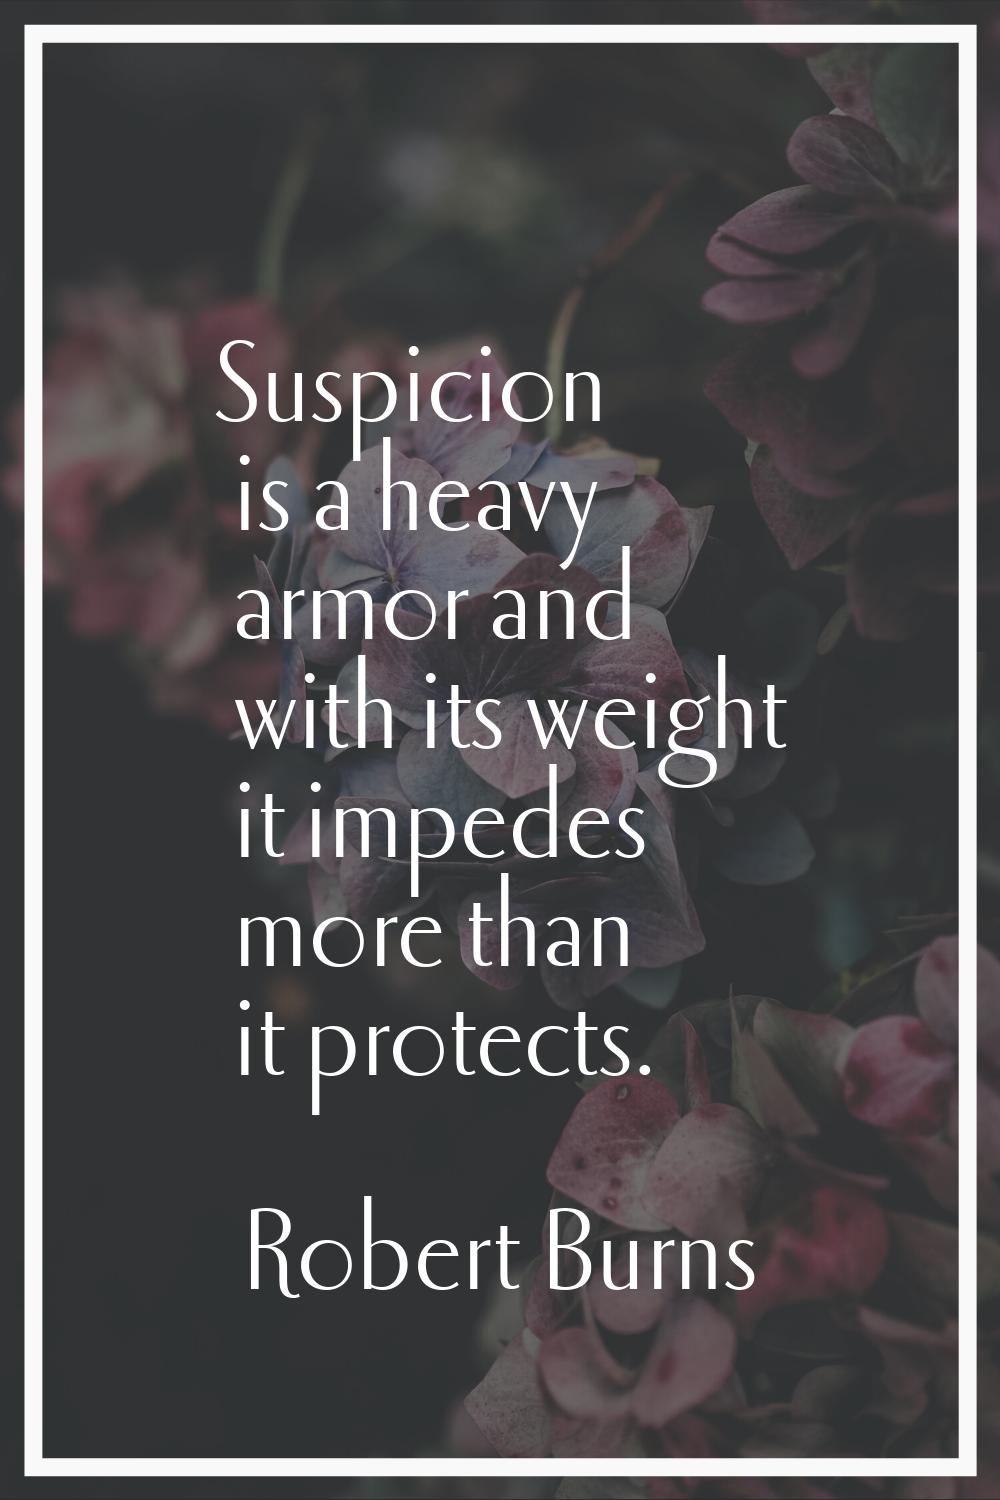 Suspicion is a heavy armor and with its weight it impedes more than it protects.